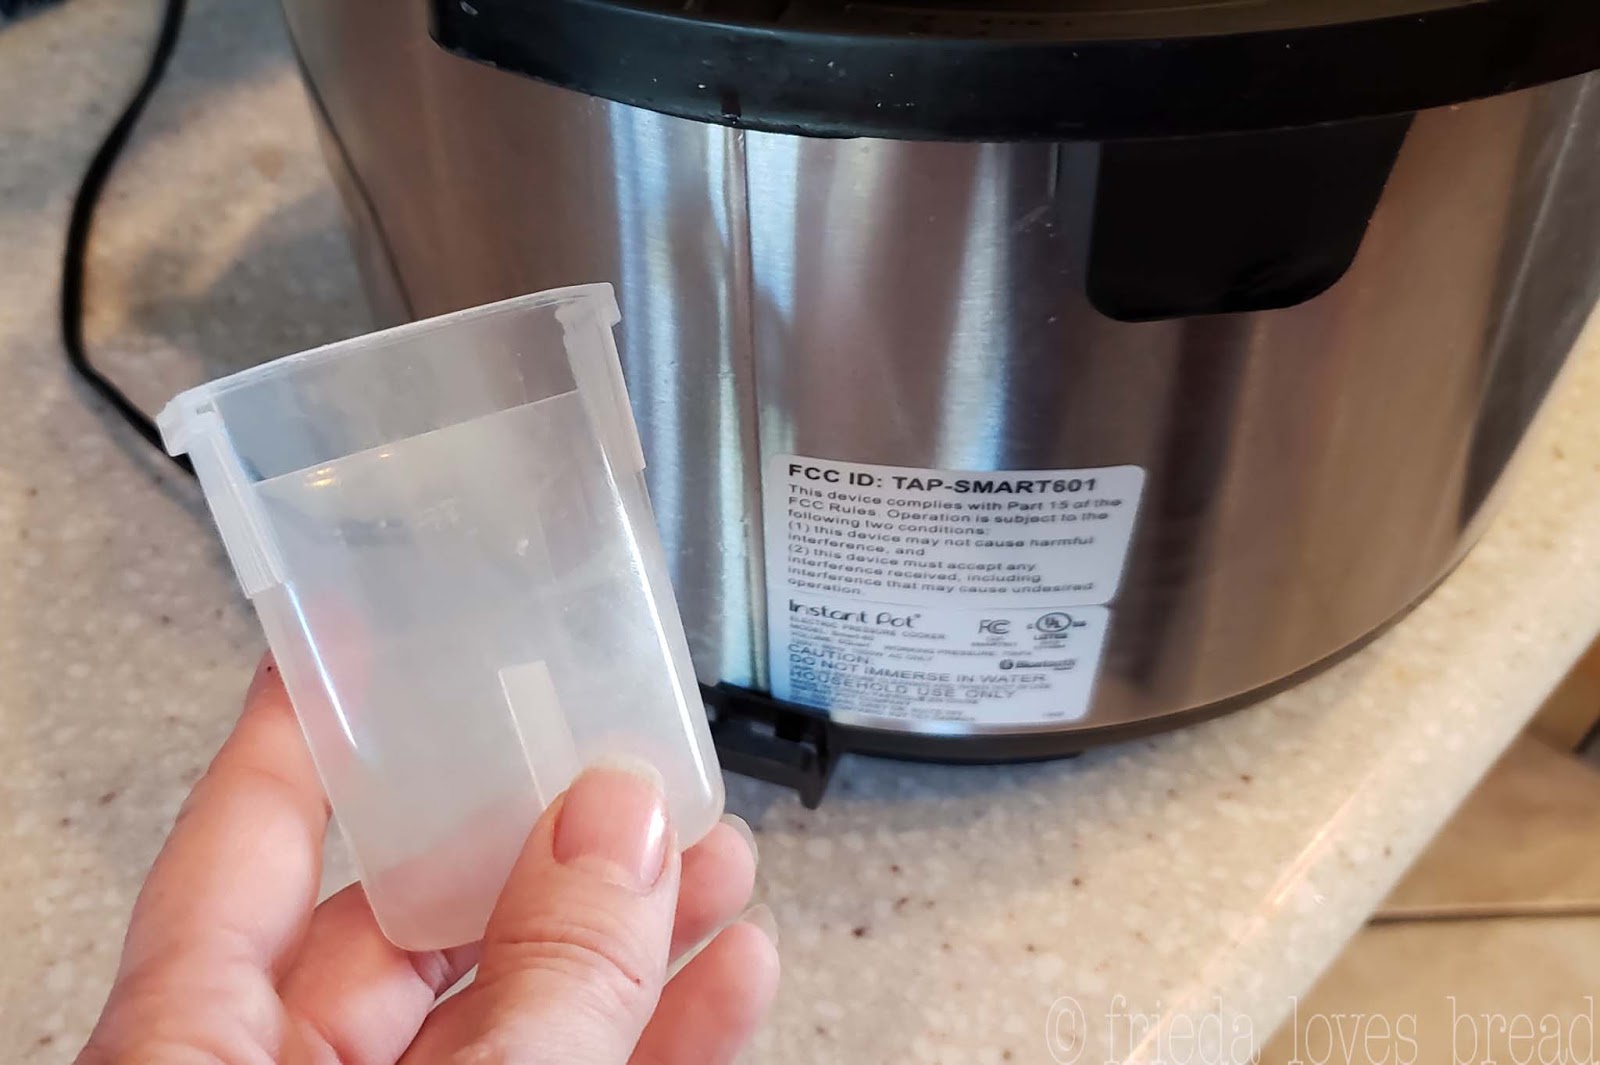 How to install the condensation collector on an instant pot - Quora